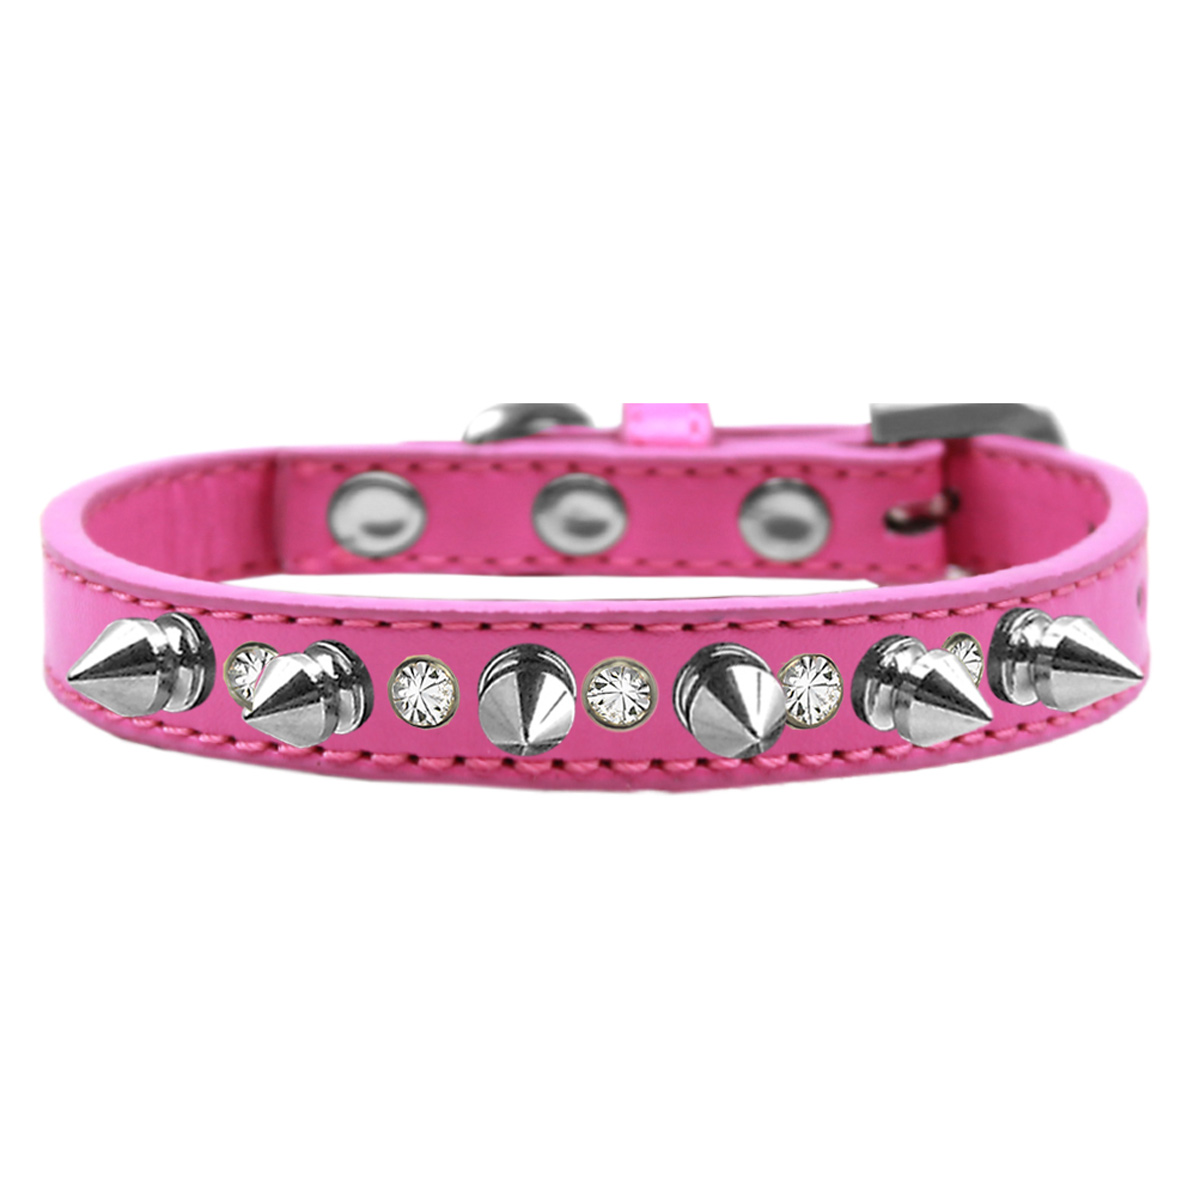 Crystals & Silver Spikes Dog Collar, Bright Pink - Size 16